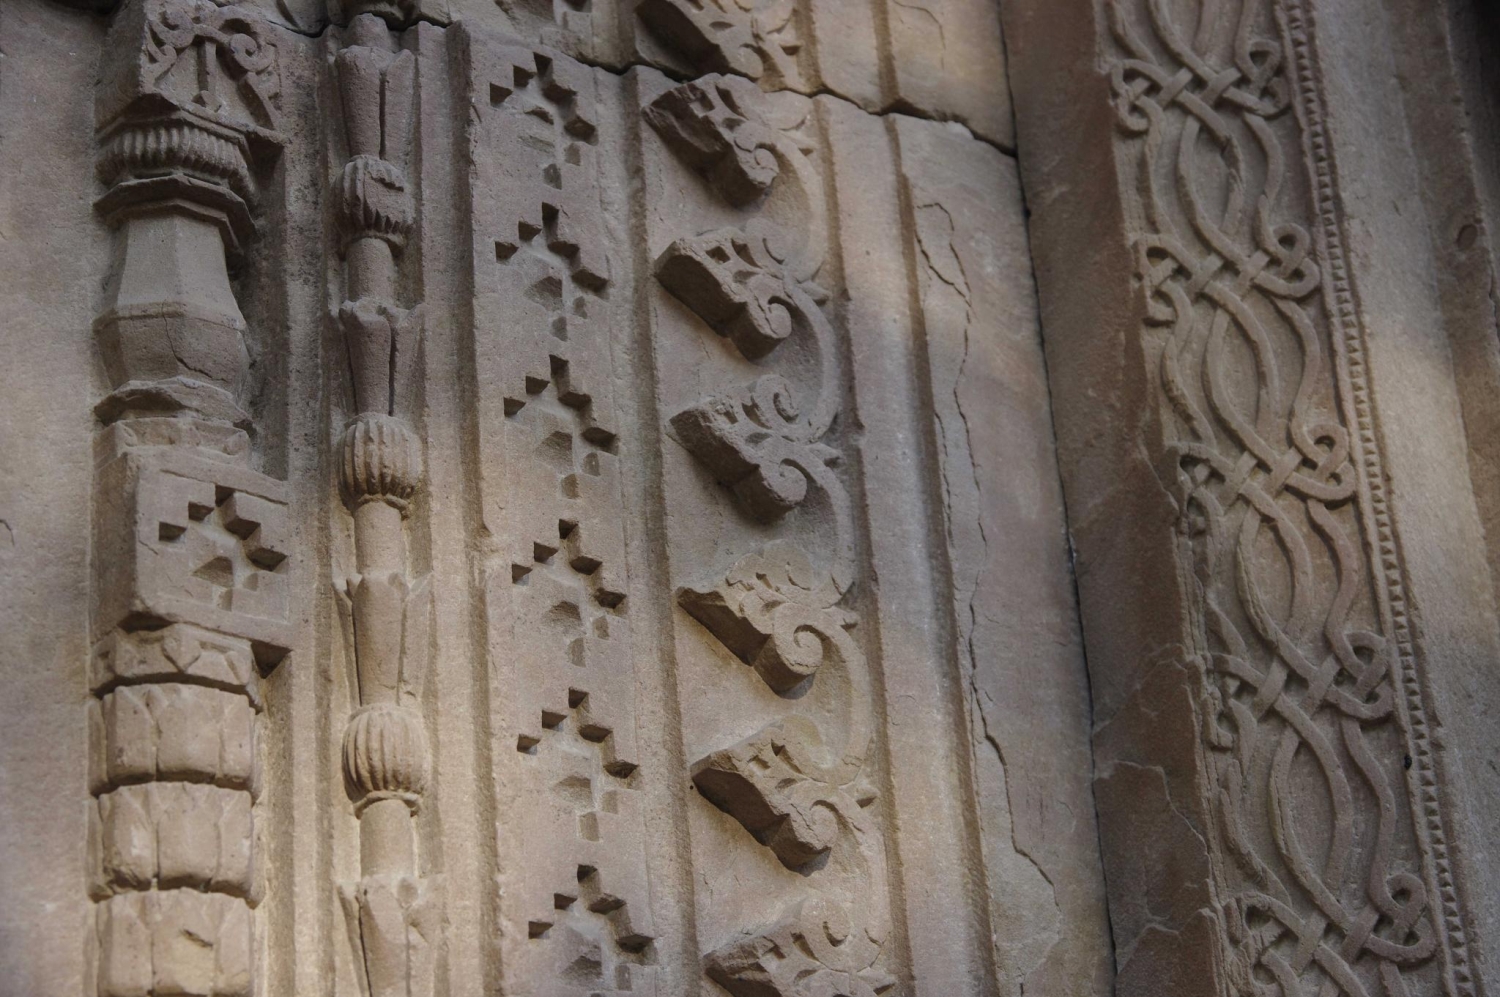 Carved ornament detail